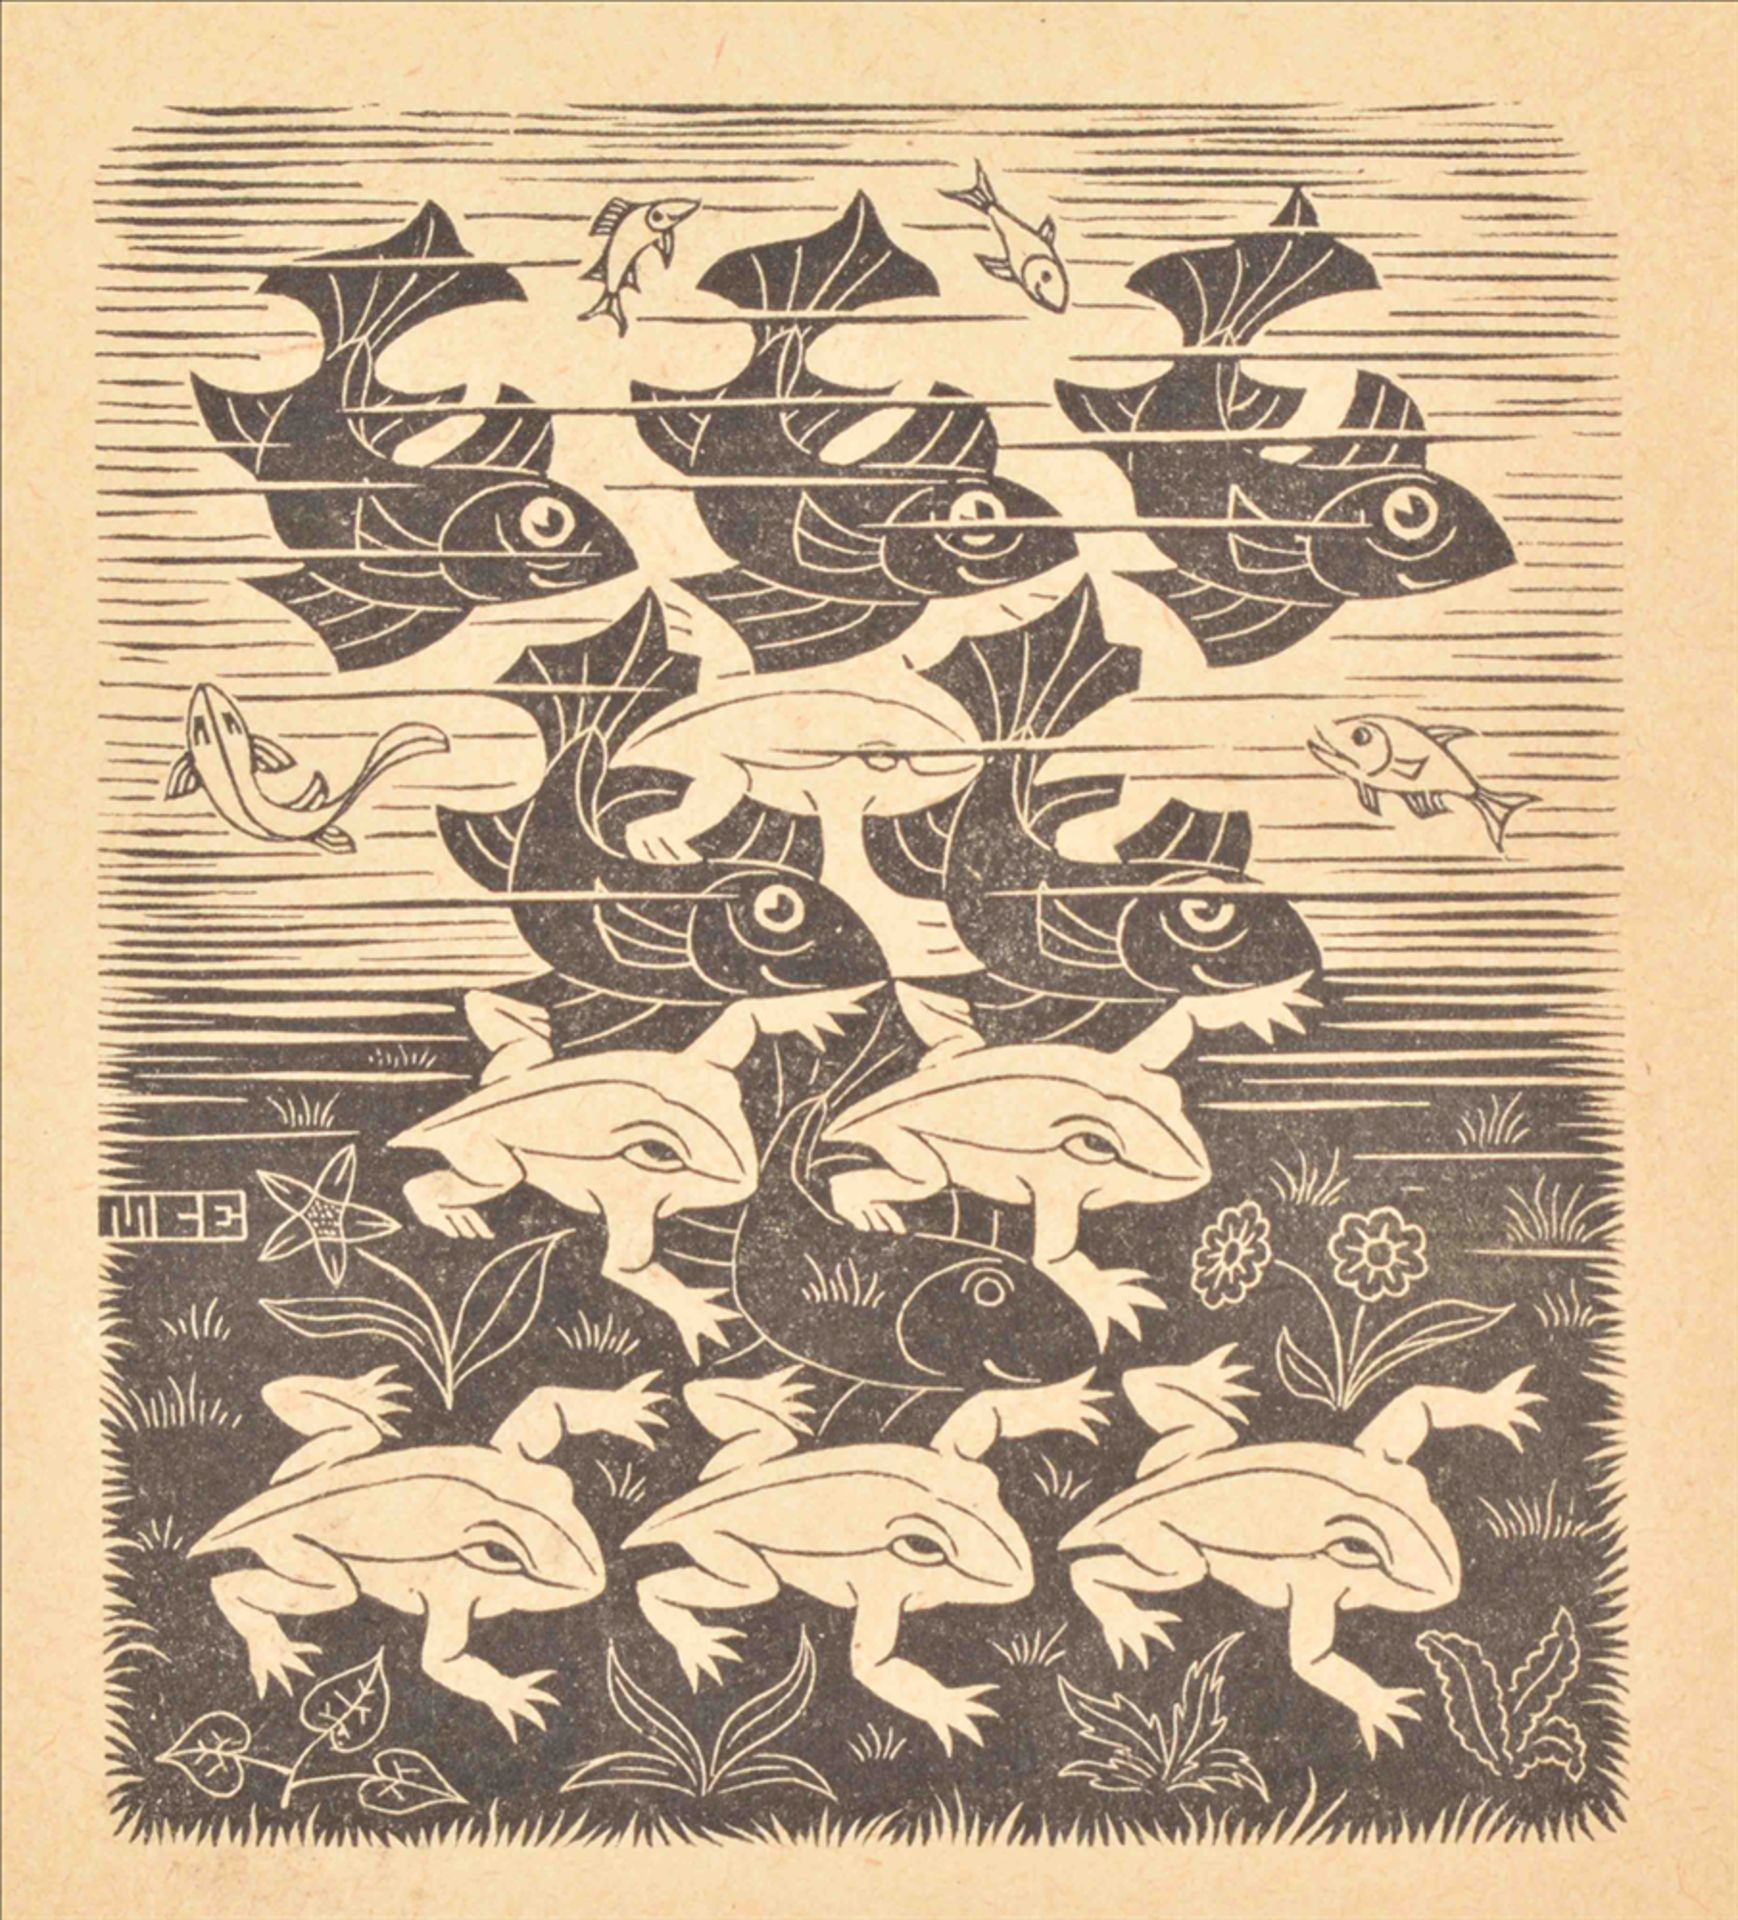 M.C. Escher (1898-1972). Fish and frogs